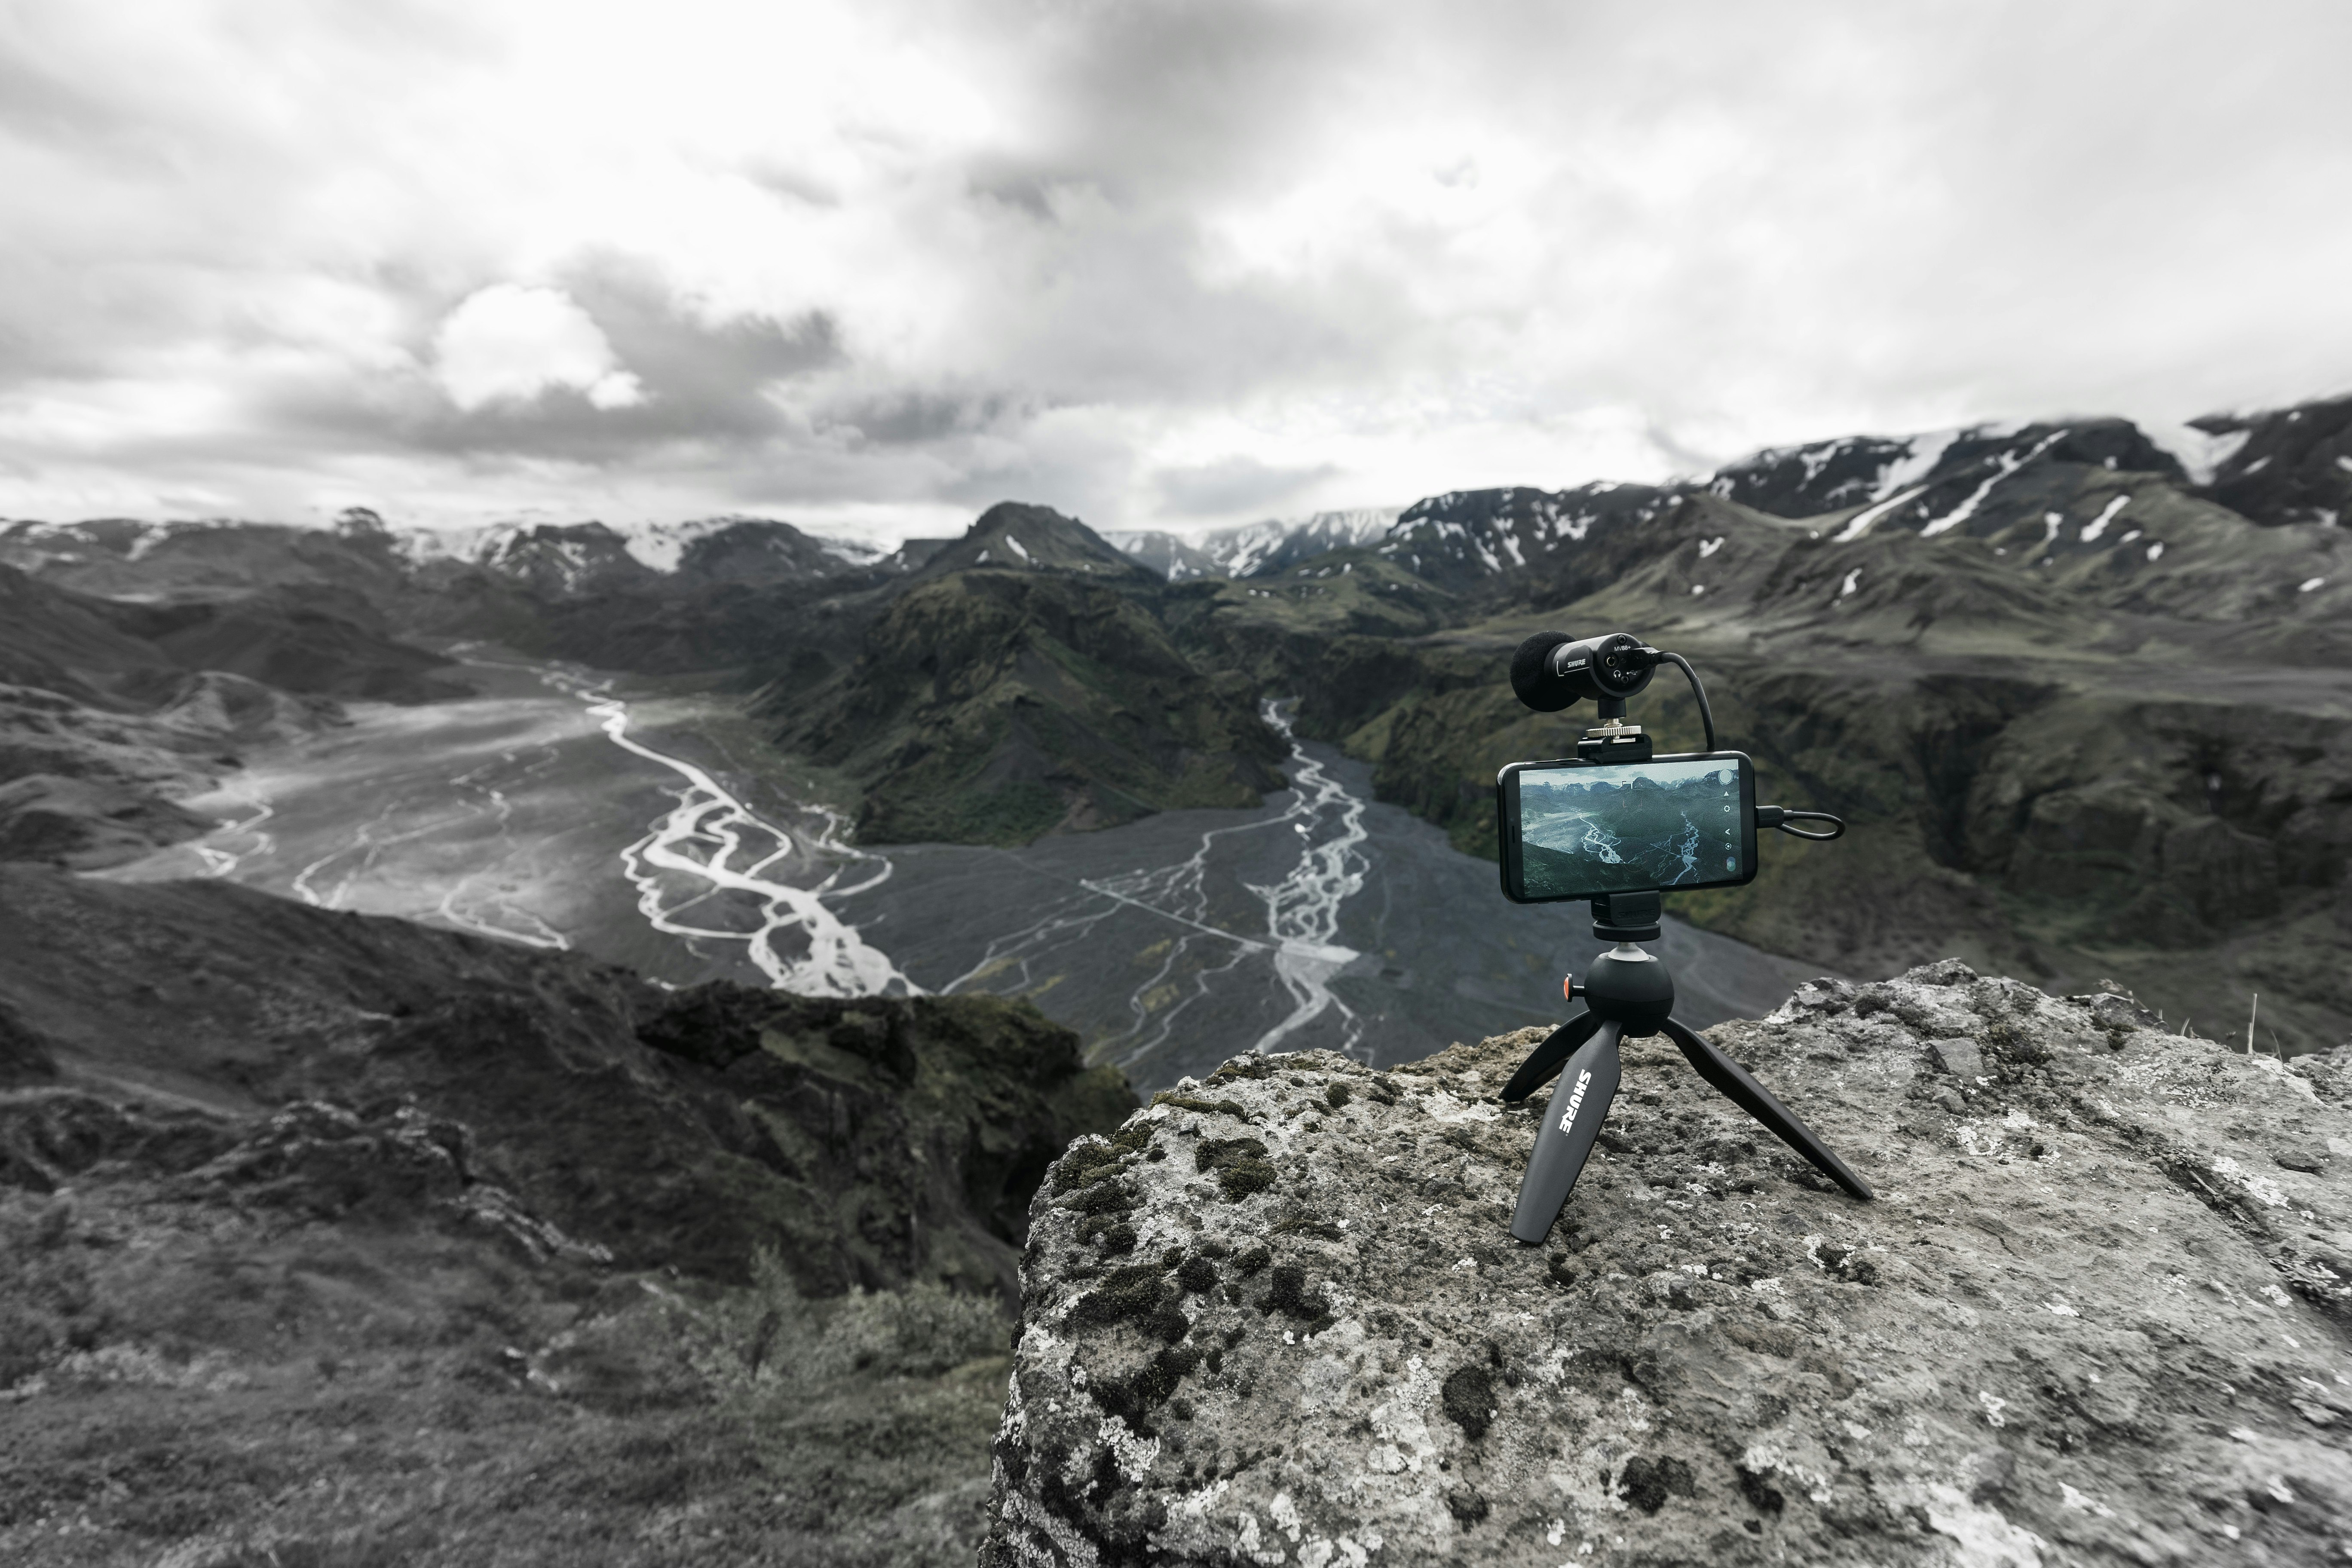 A smartphone on a tripod set up on a cliff overlooking a deep valley, with gray clouds overhead